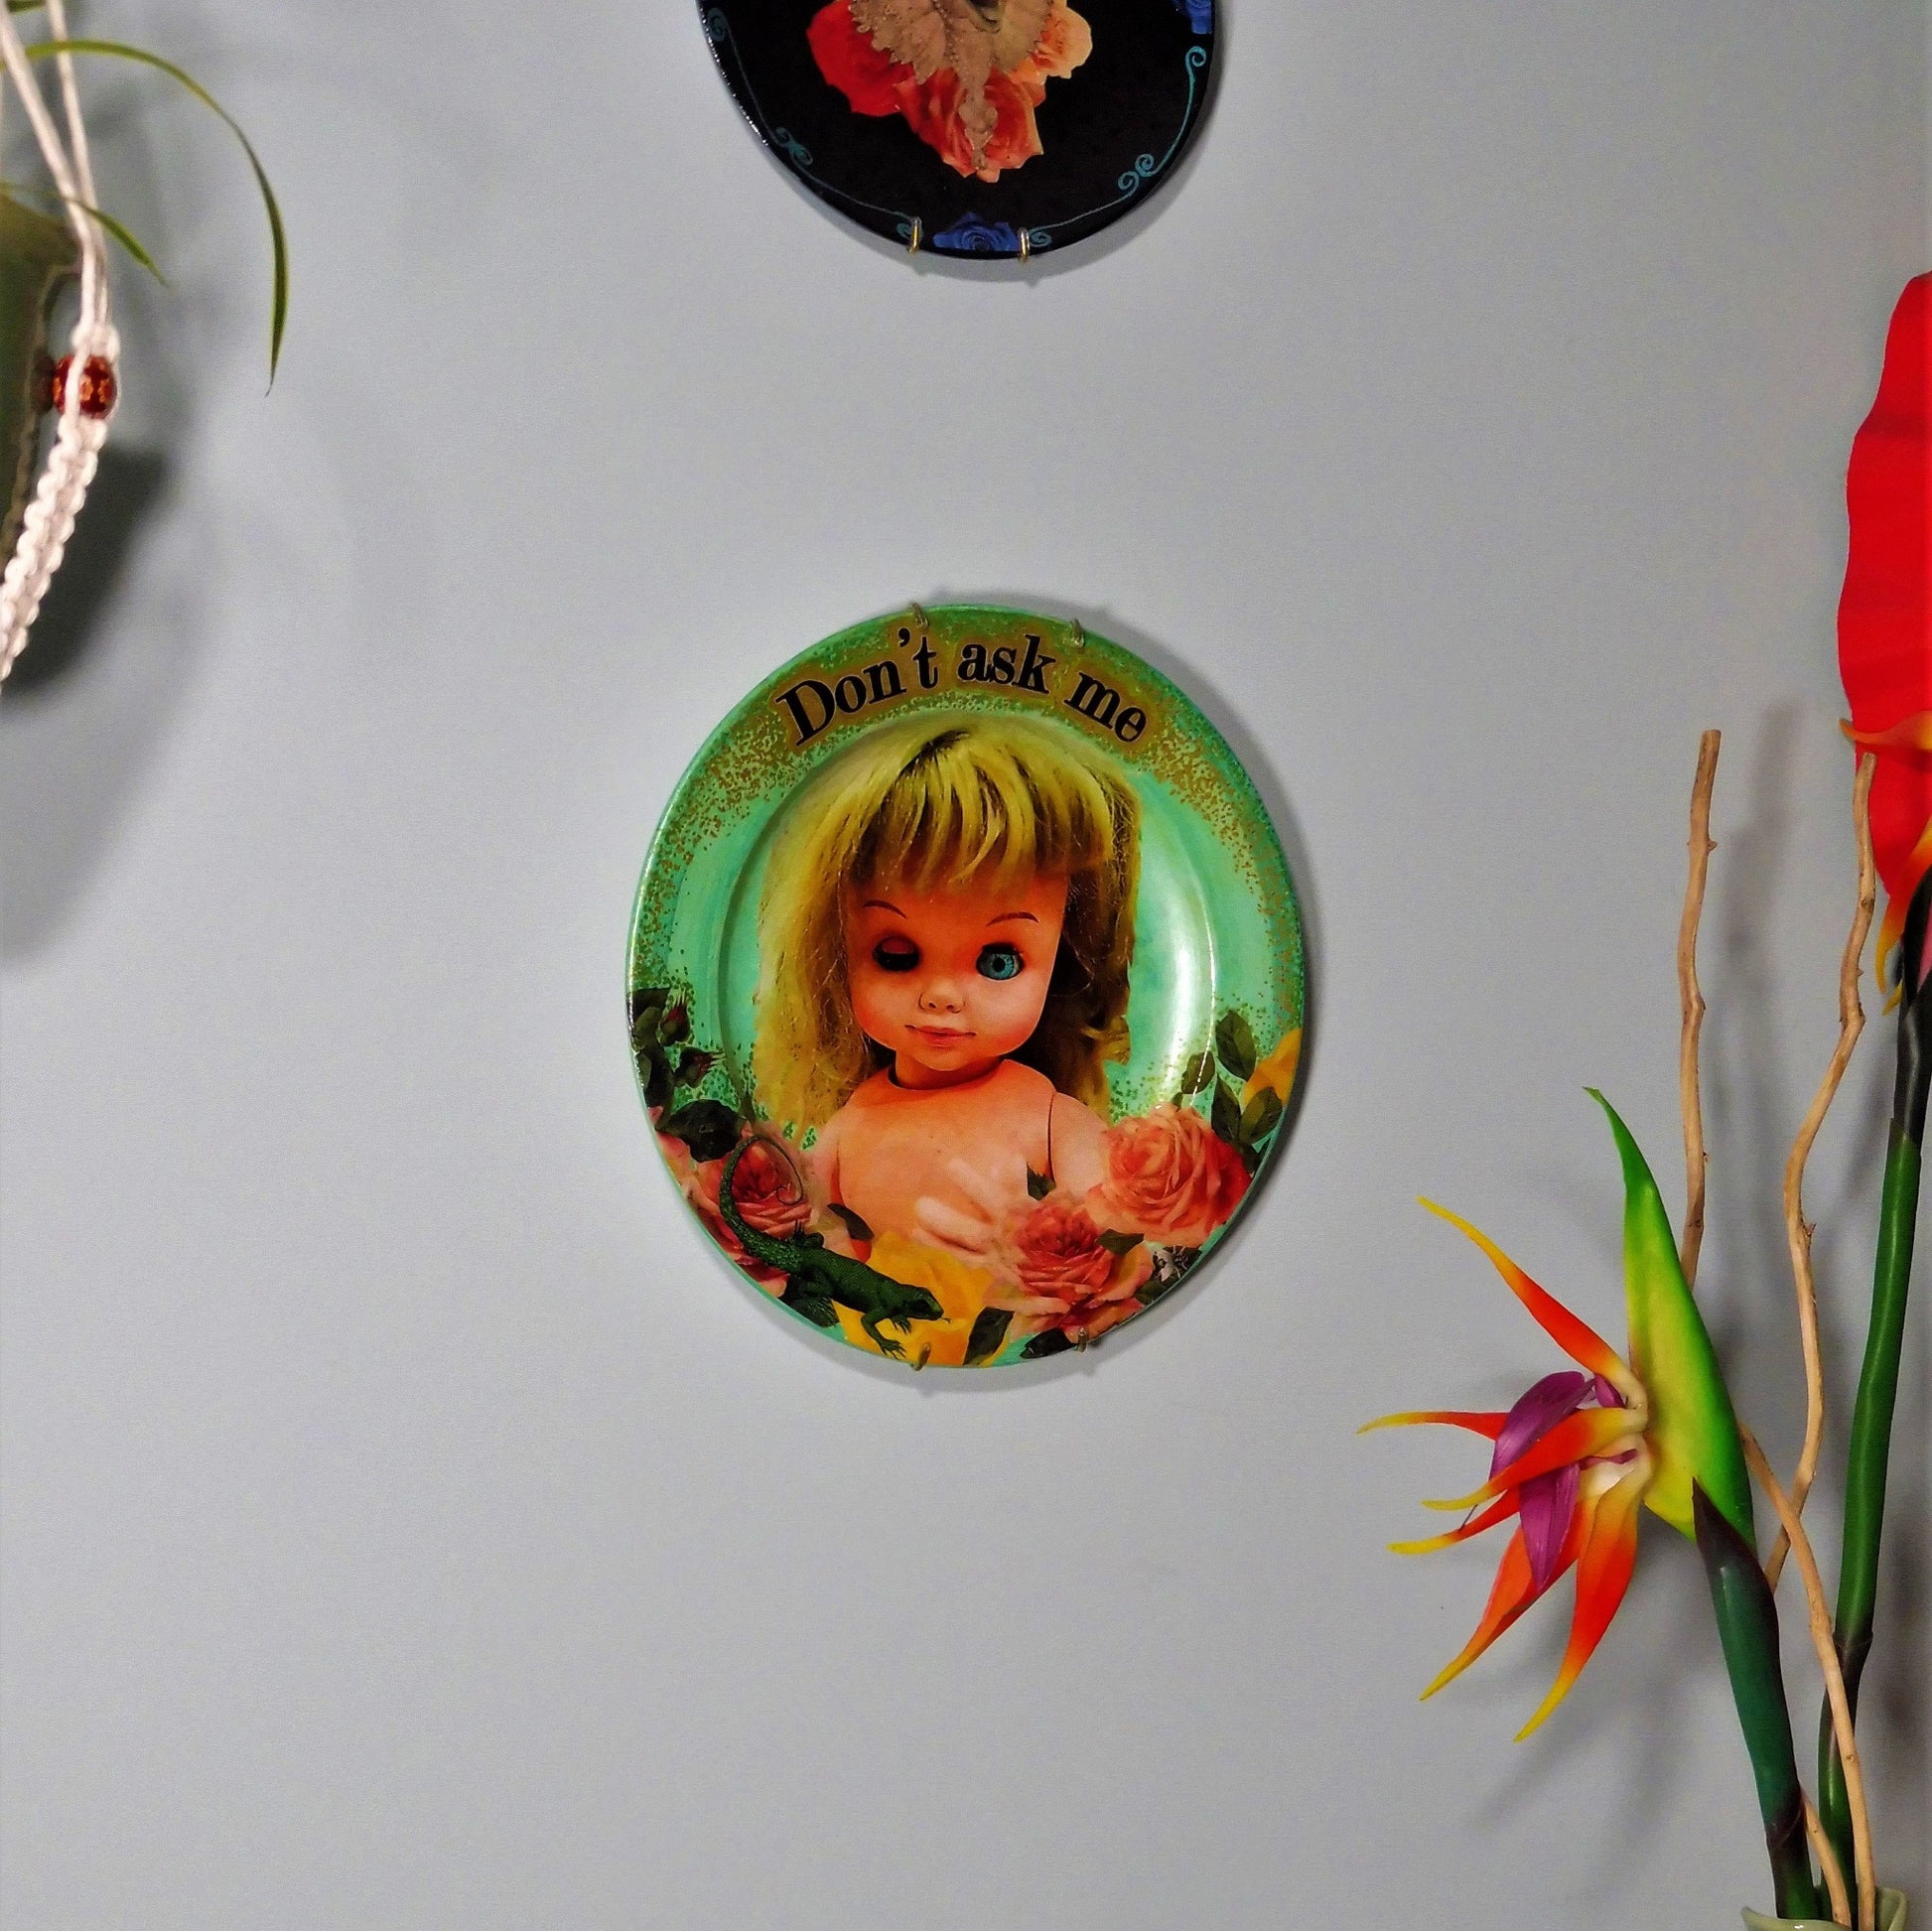 House of Frisson "Don't Ask Me" Green Wall Plate Front. Collage artwork featuring a vintage doll with funny face, surrounded by roses, and a lizard. Showing plate hanging on a wall with other plates.